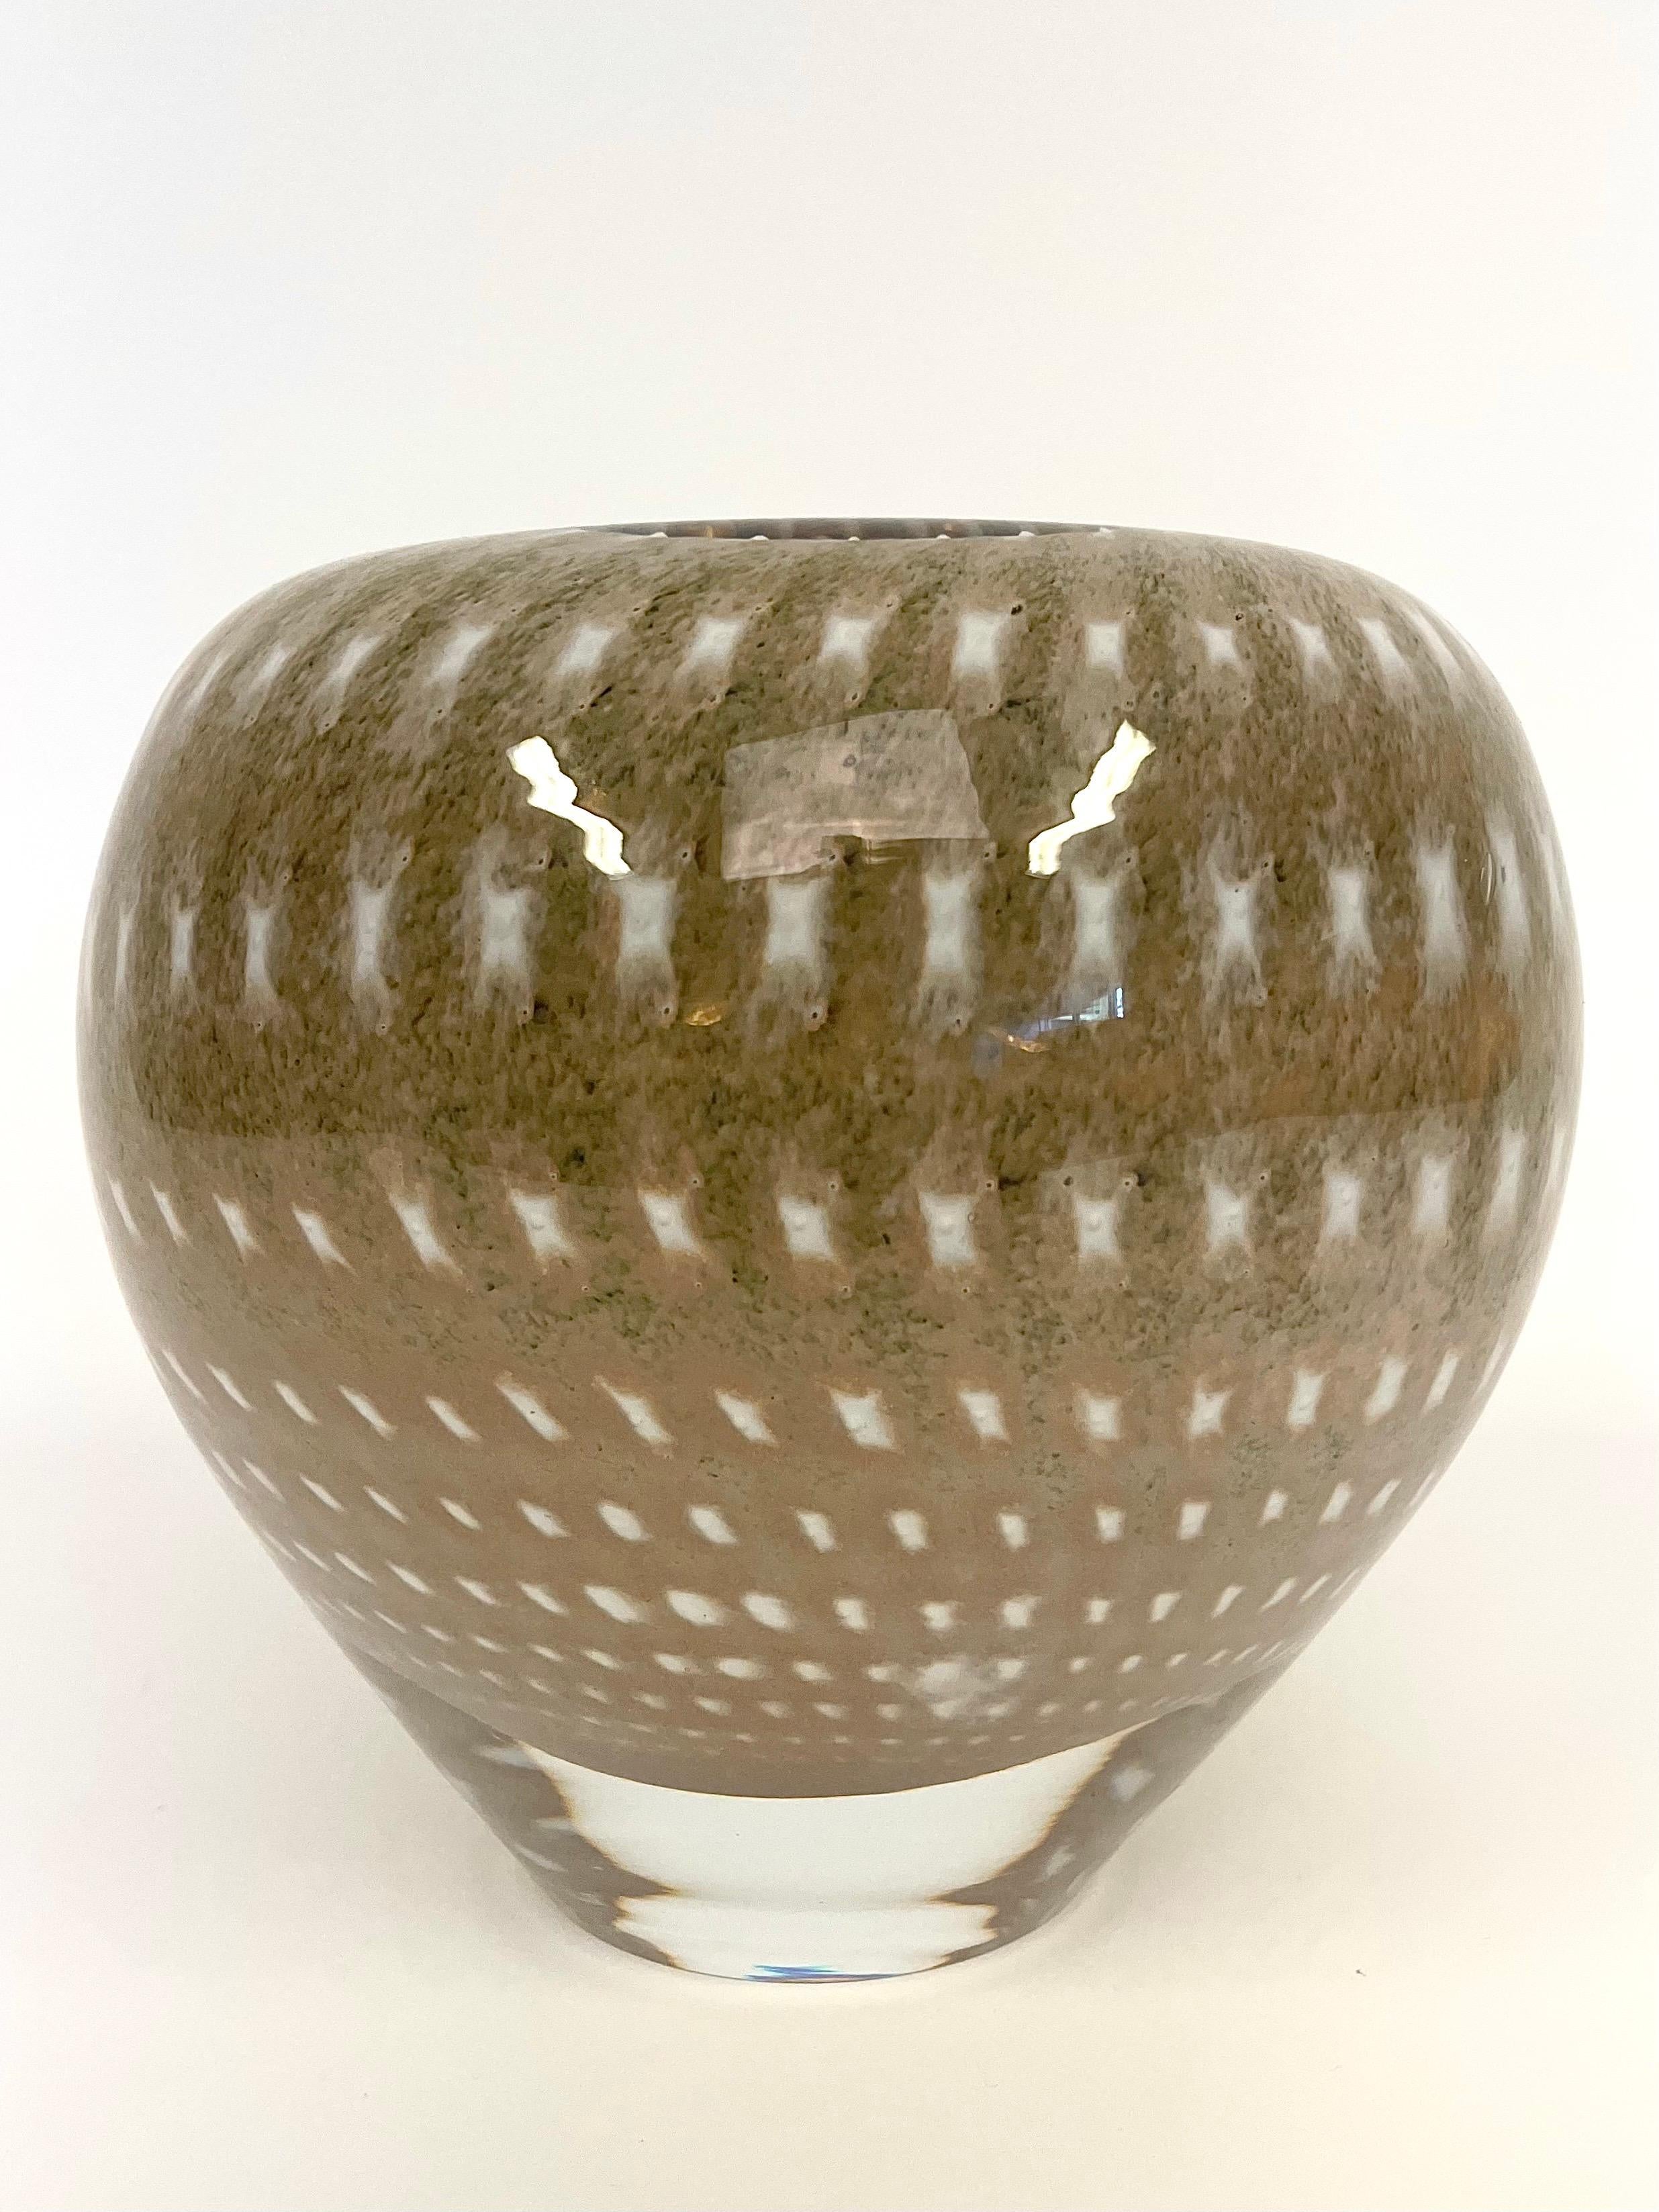 This is a Swedish very rare glass vase in the Kosta Boda series Artist Collection, designed by the glass artist Monica Backström.
It has a folded, smooth rounded edge. She has used the overlay technique. The vase is a very heavy and steady piece, ca